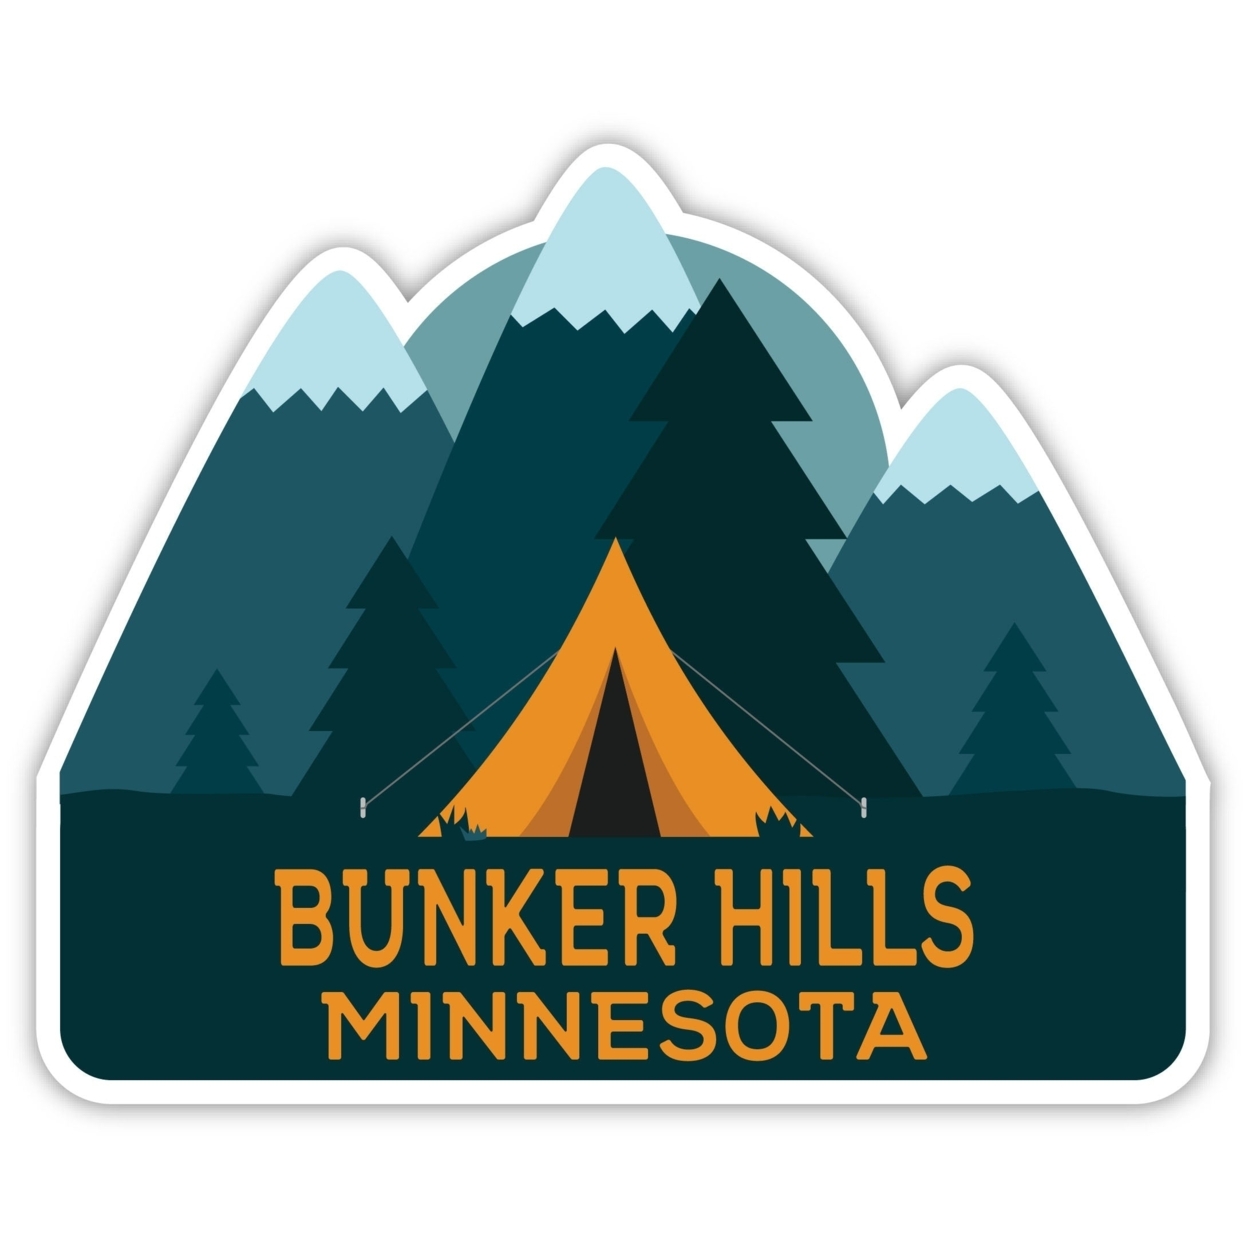 Bunker Hills Minnesota Souvenir Decorative Stickers (Choose Theme And Size) - 4-Pack, 6-Inch, Tent